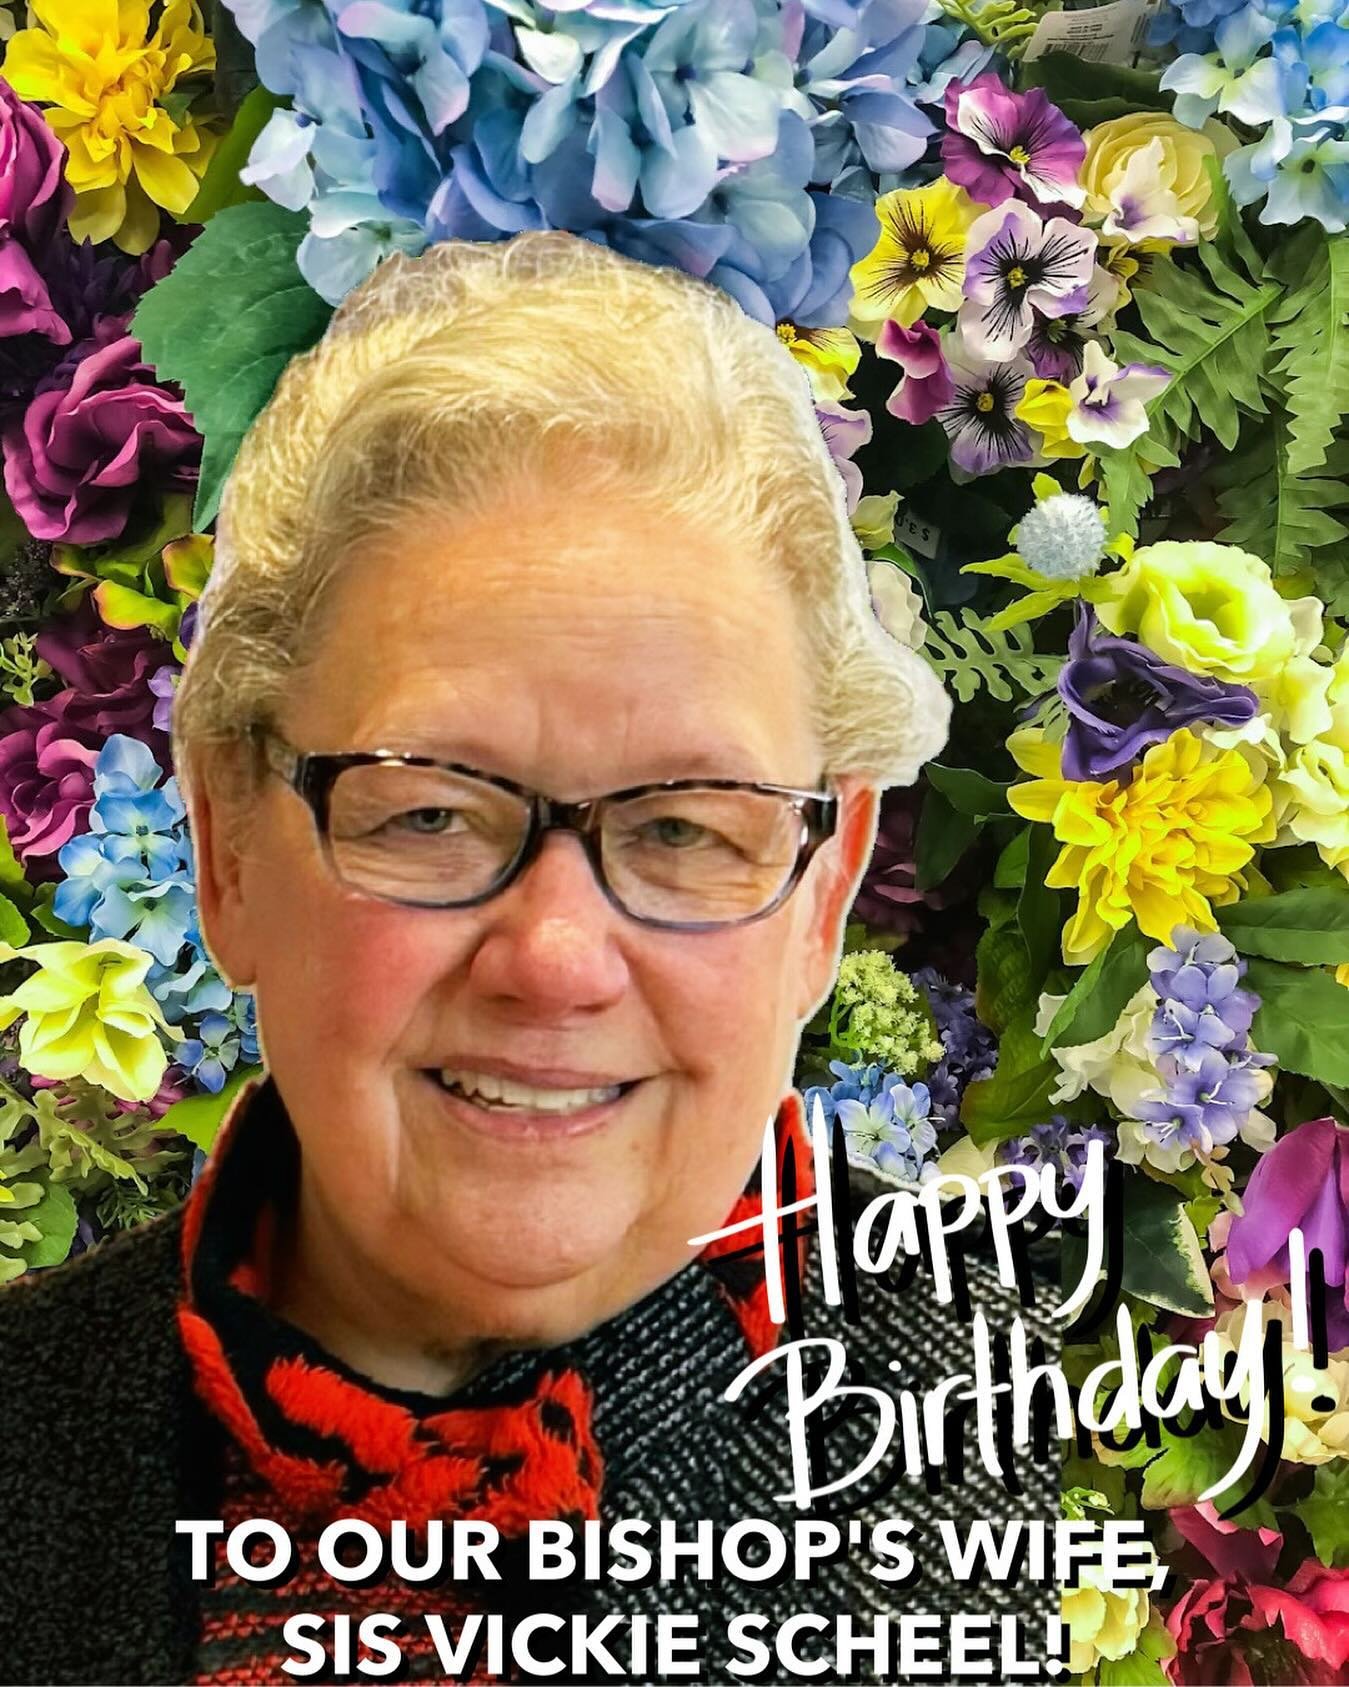 💐💐A VERY HAPPY BIRTHDAY to our Bishop&rsquo;s Wife, Sis. Vickie Scheel!!!💐💐. The Lighthouse loves Granna Scheel! @grannascheel 💚💚 #lighthousepentecostalchurch #beebe #beebearkansas #pentecostal #apostolic #happybirthday